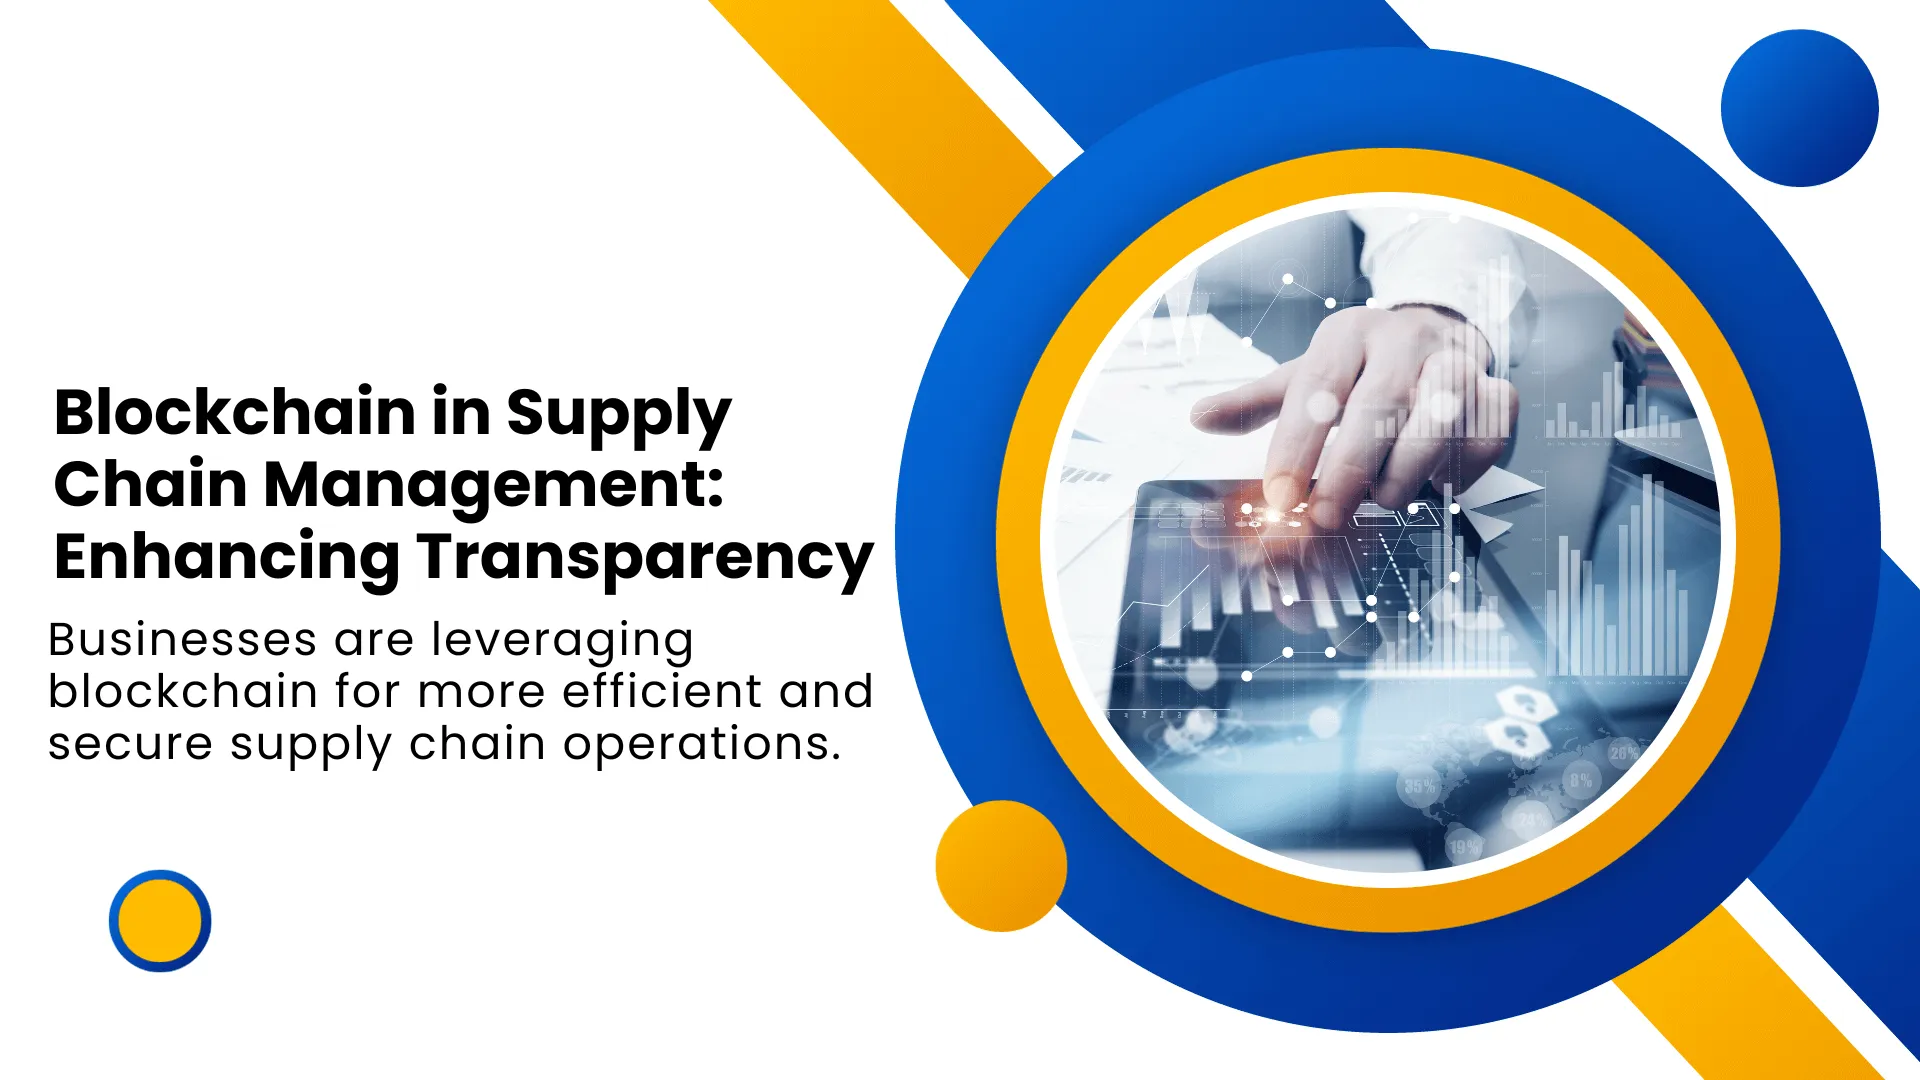 Blockchain in Supply Chain Management Enhancing Transparency